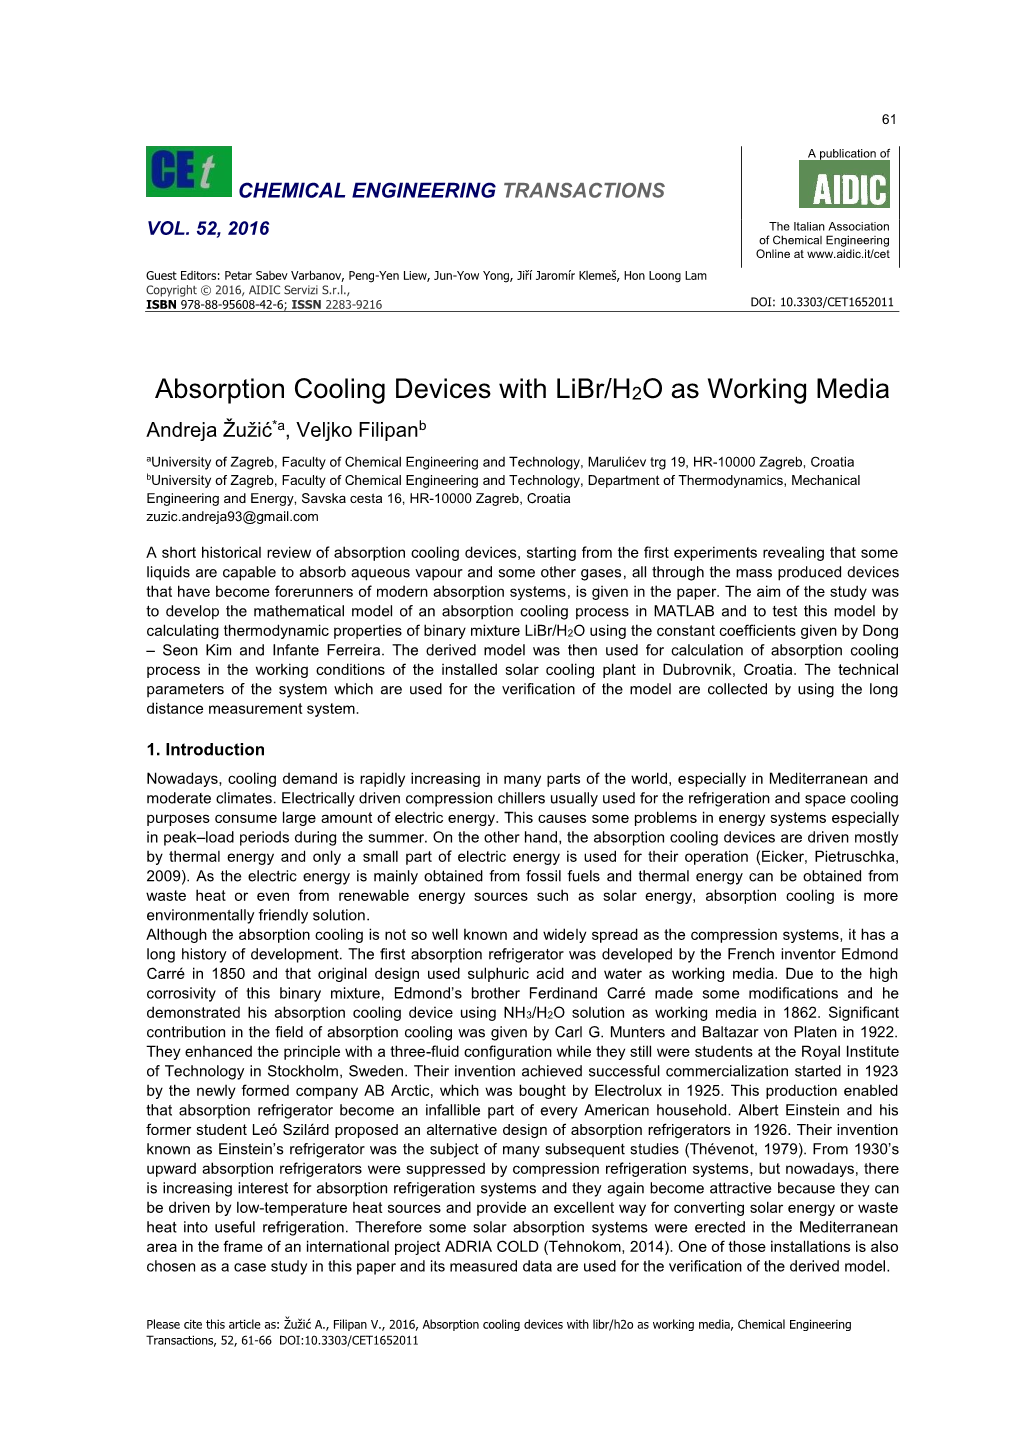 Absorption Cooling Devices with Libr/H2O As Working Media